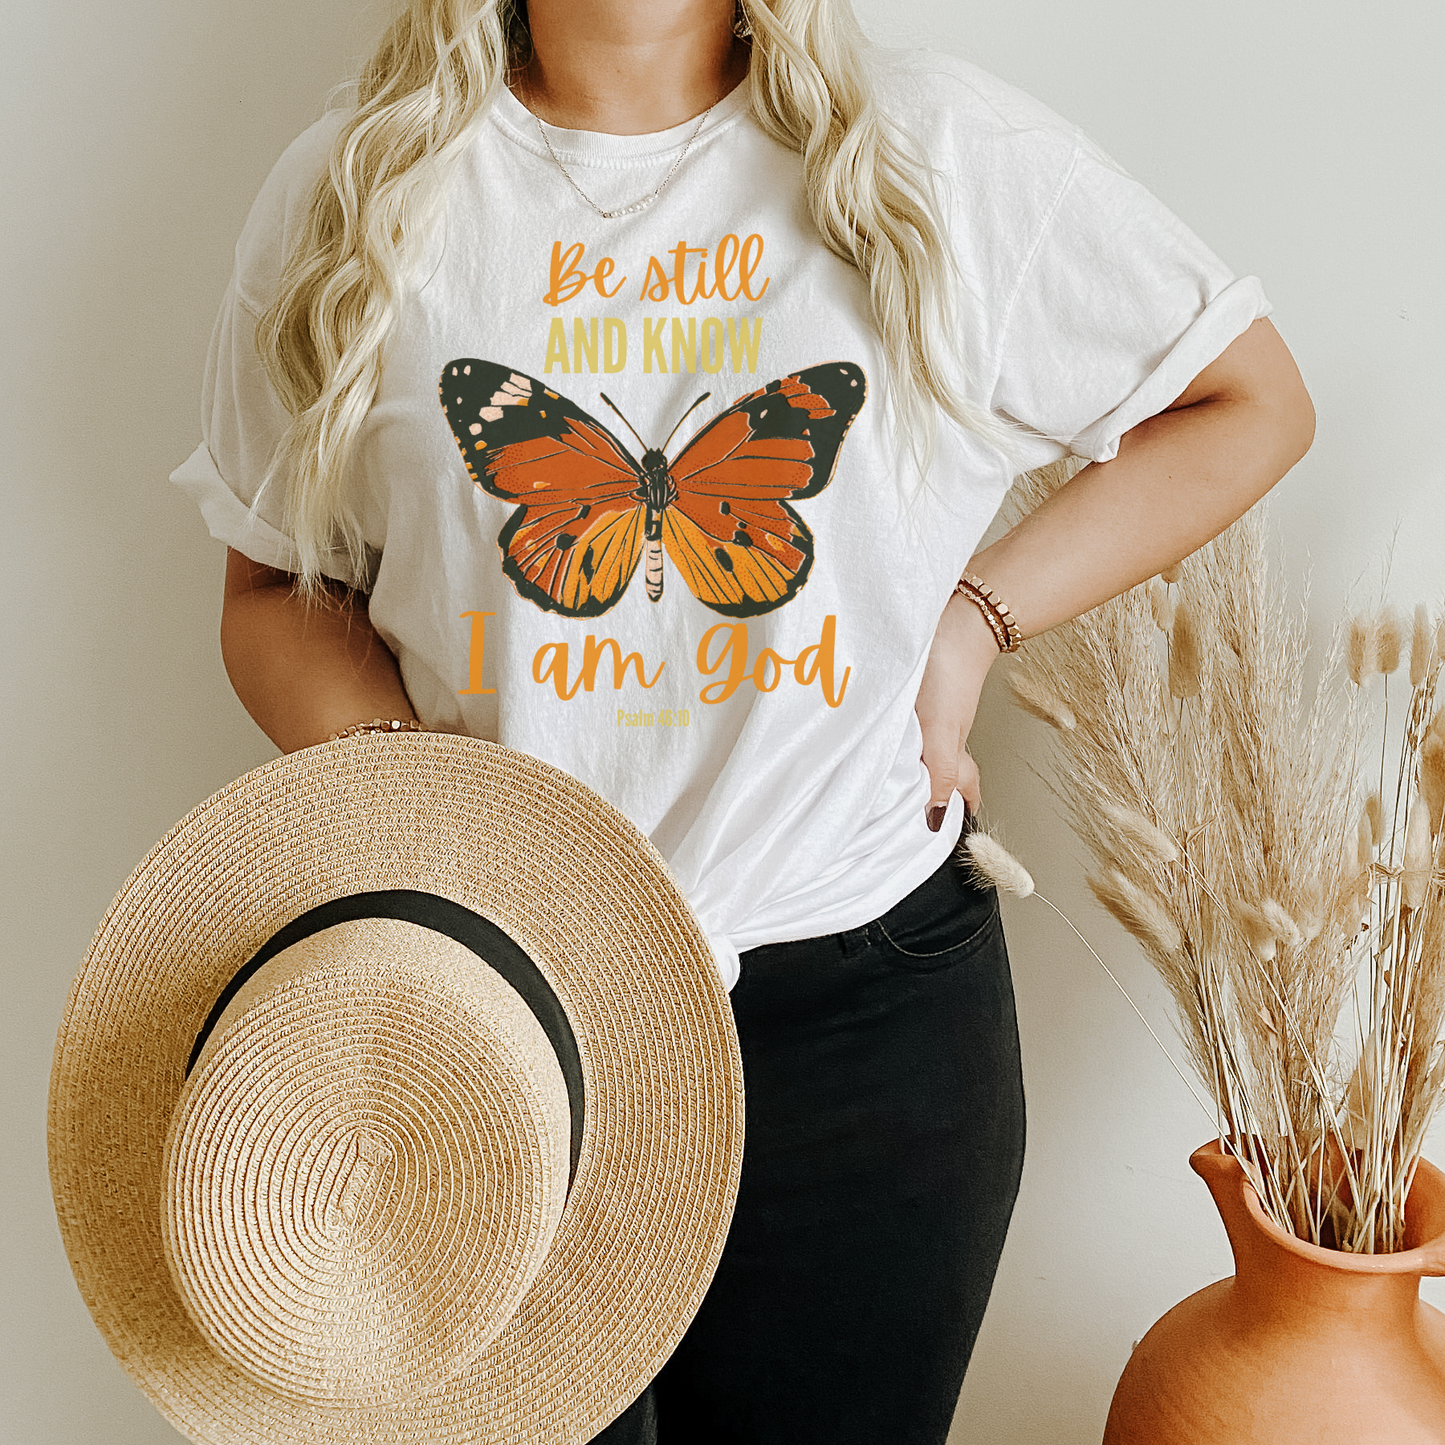 Be Still and Know I am God, Psalm 46:10, Butterfly Shirt, Comfort Colors Christian T-Shirt